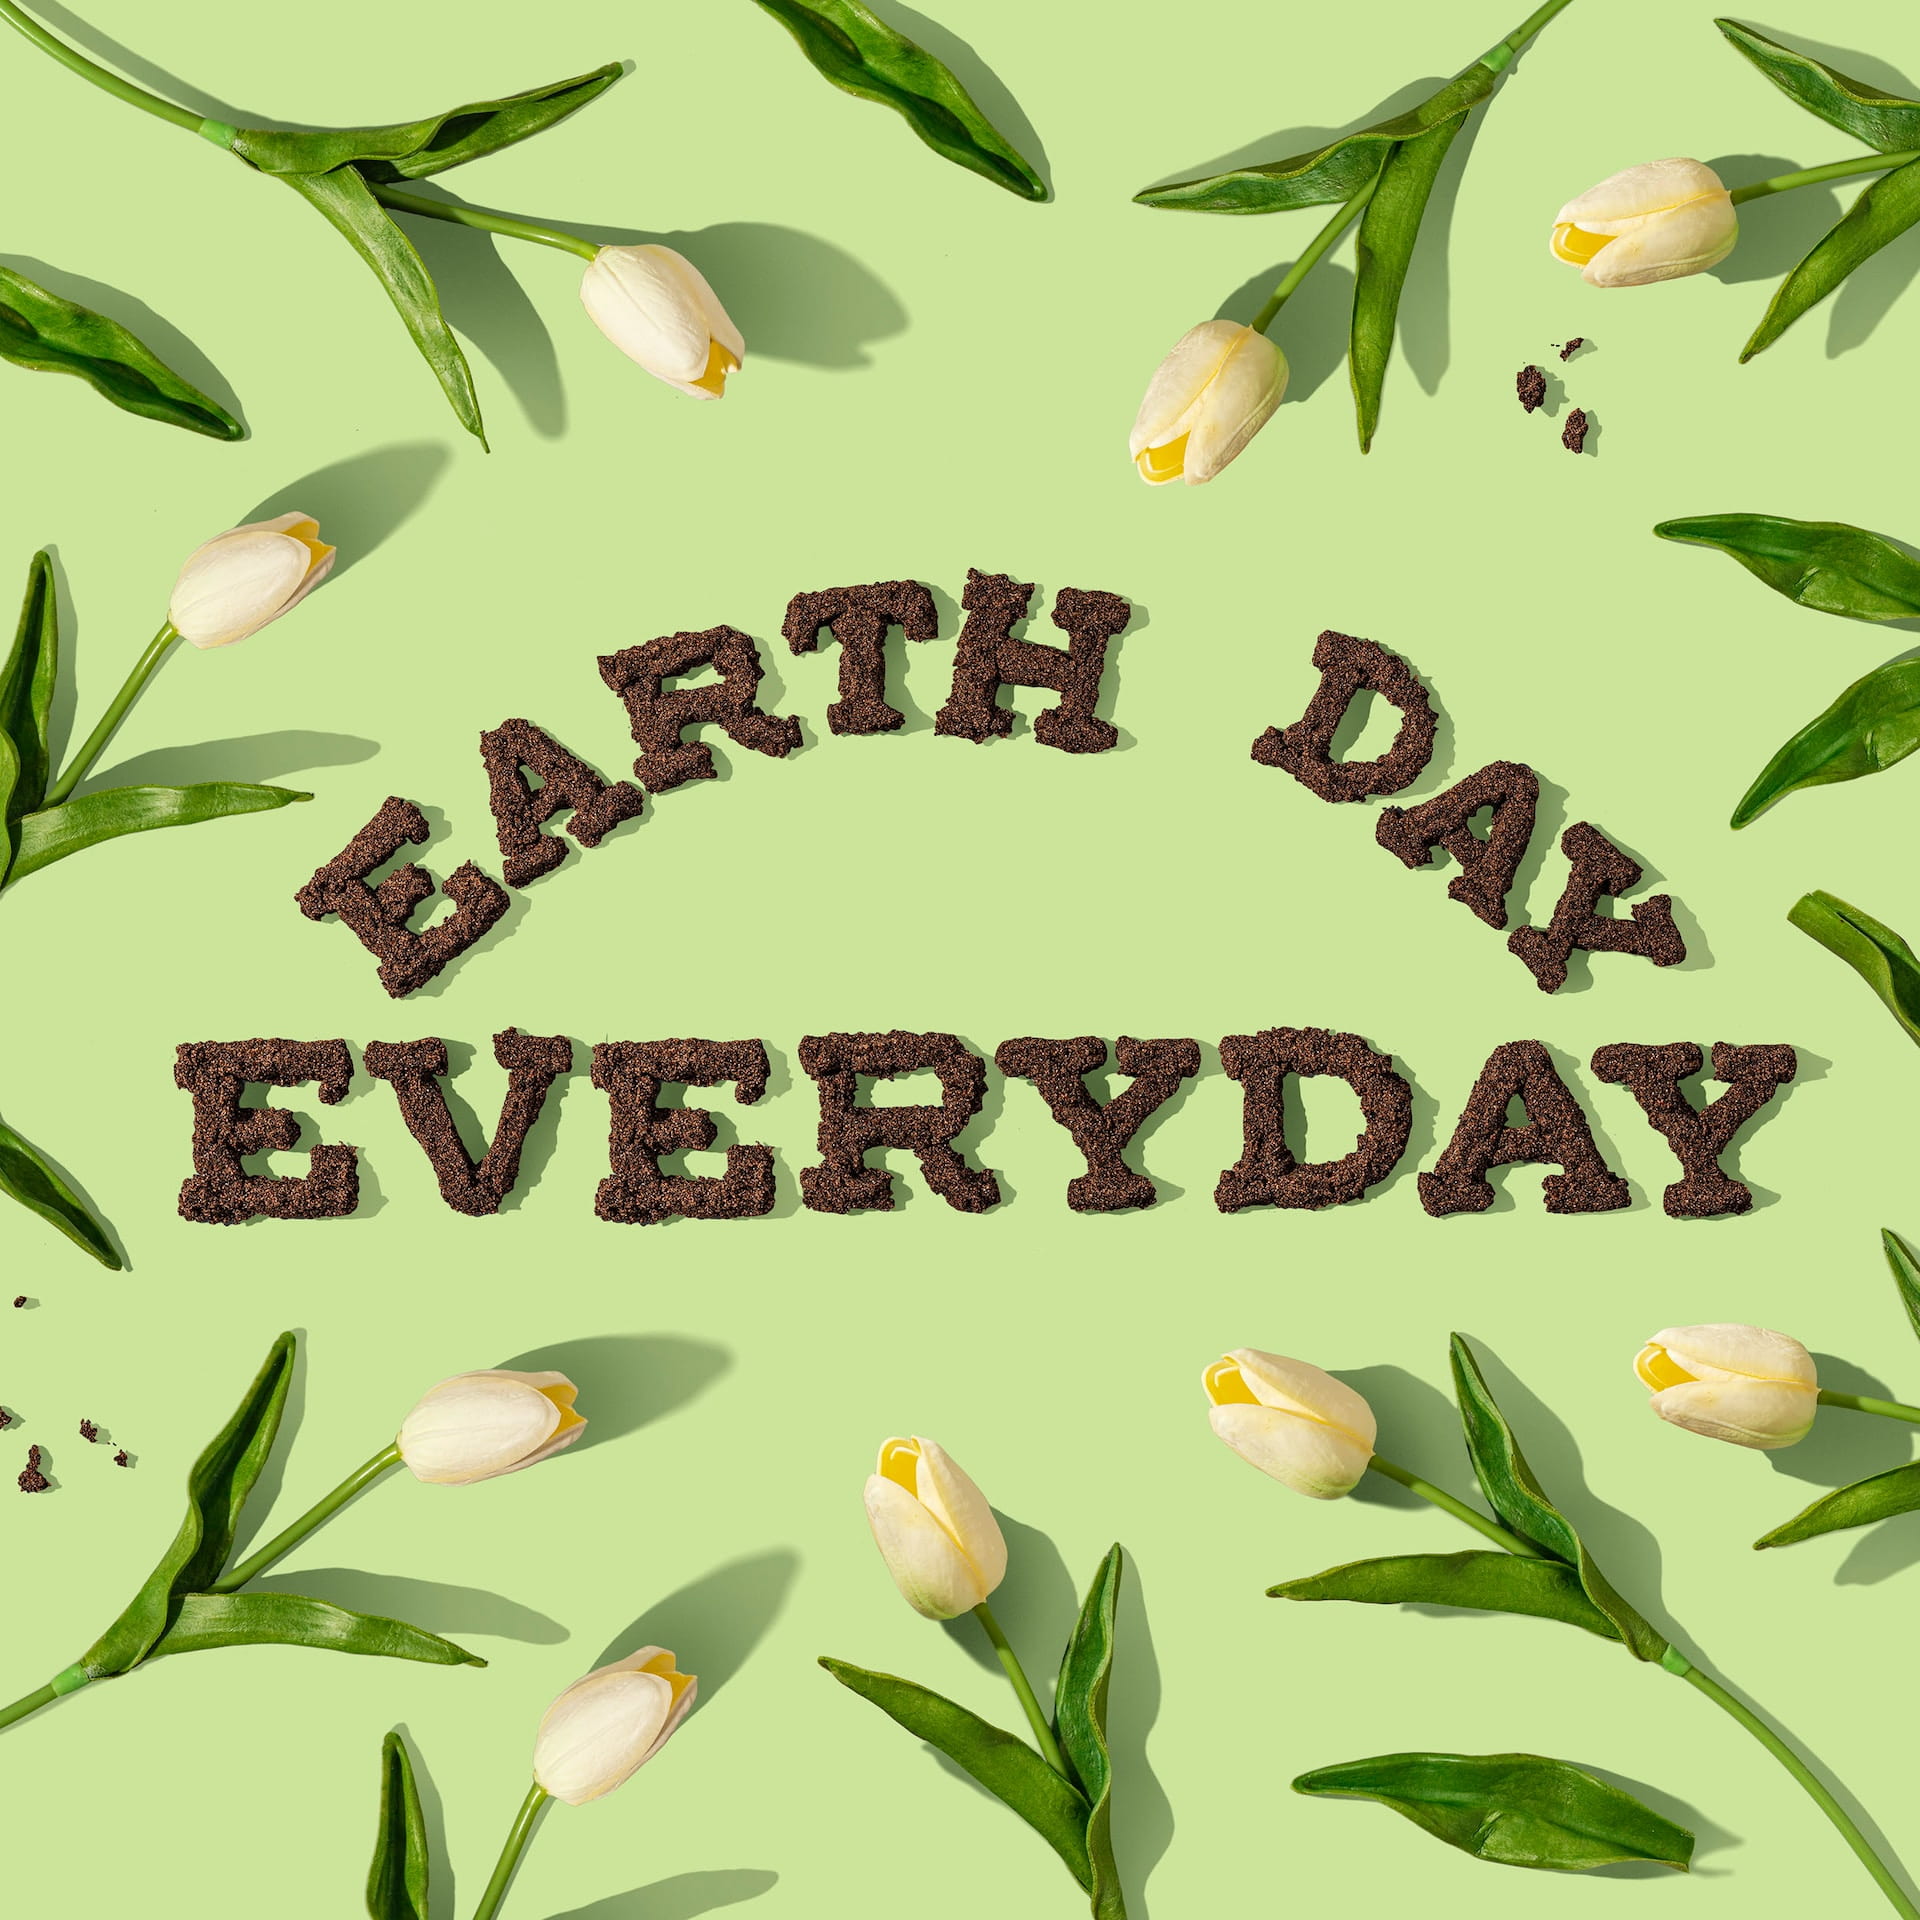 Earth Day Image from Unsplash website.